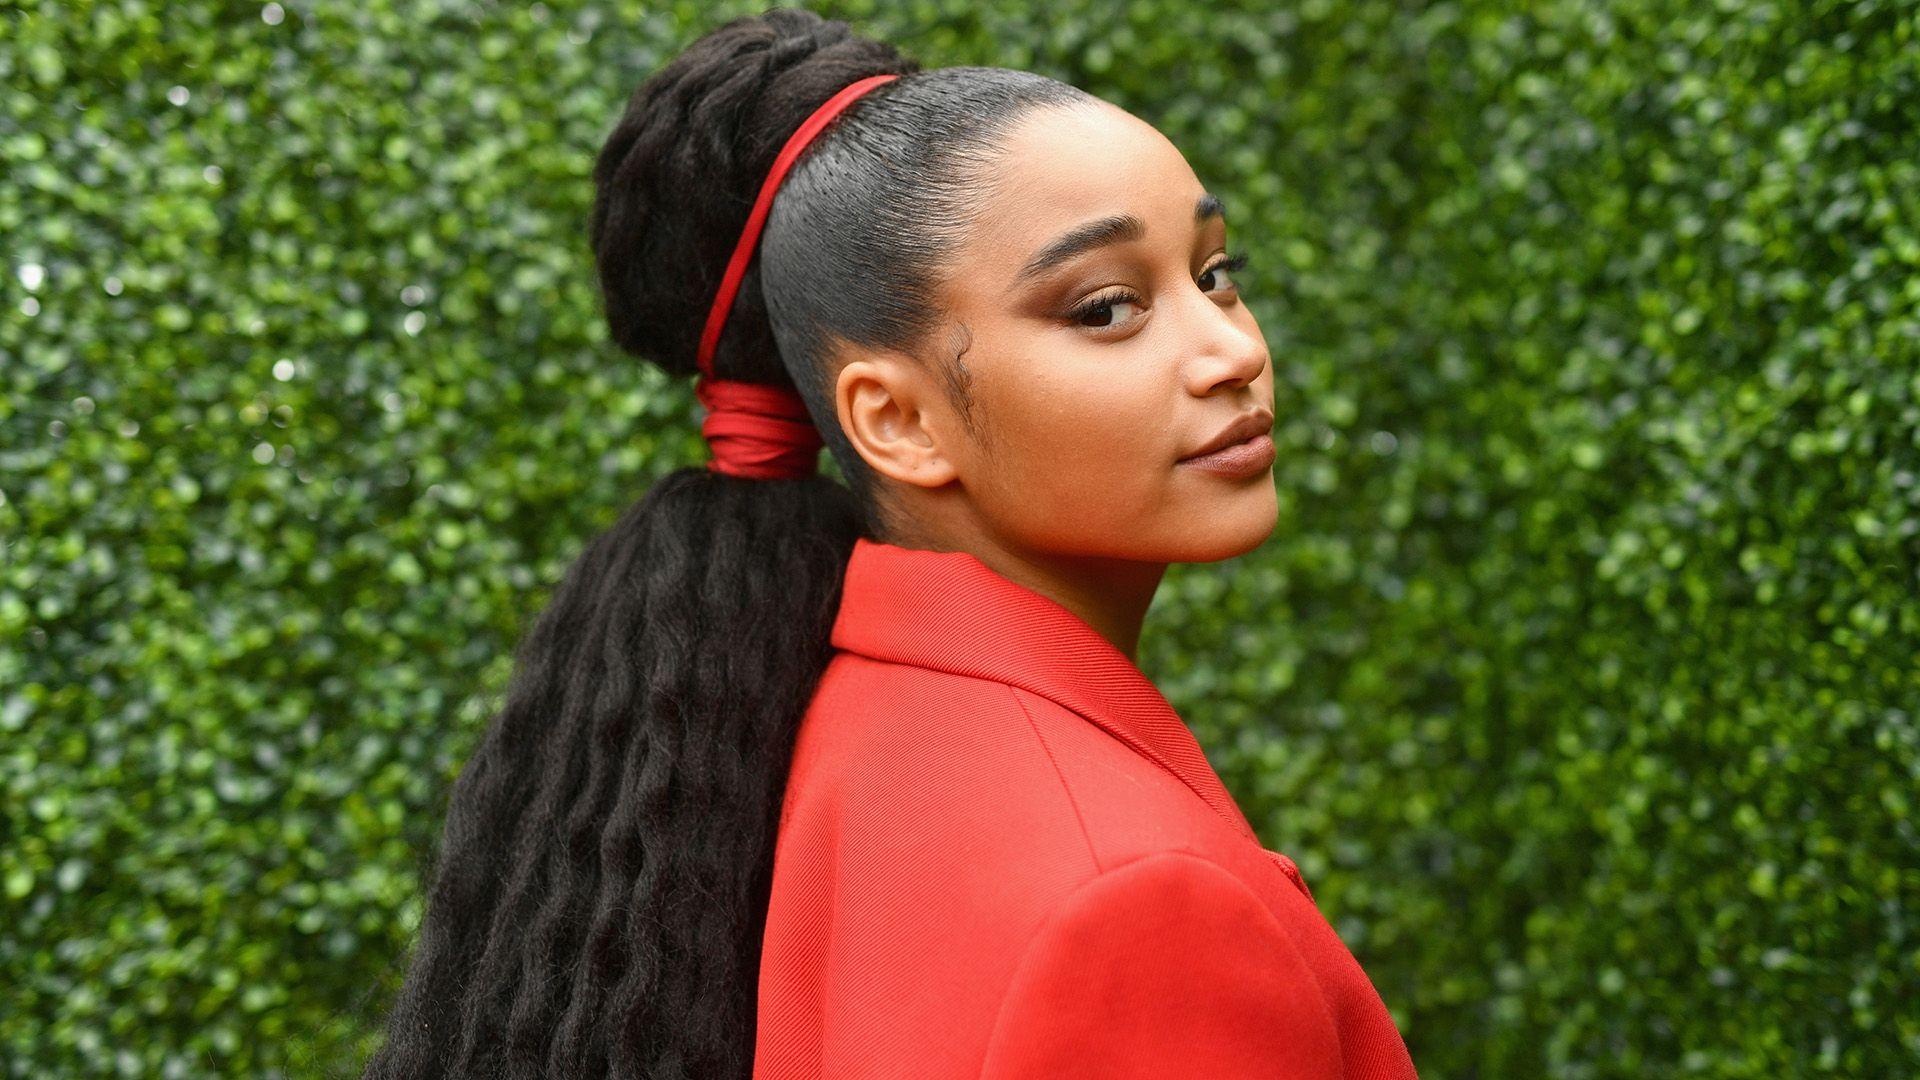 Amandla Stenberg Told to Lose Weight, Make Boobs Smaller for Film